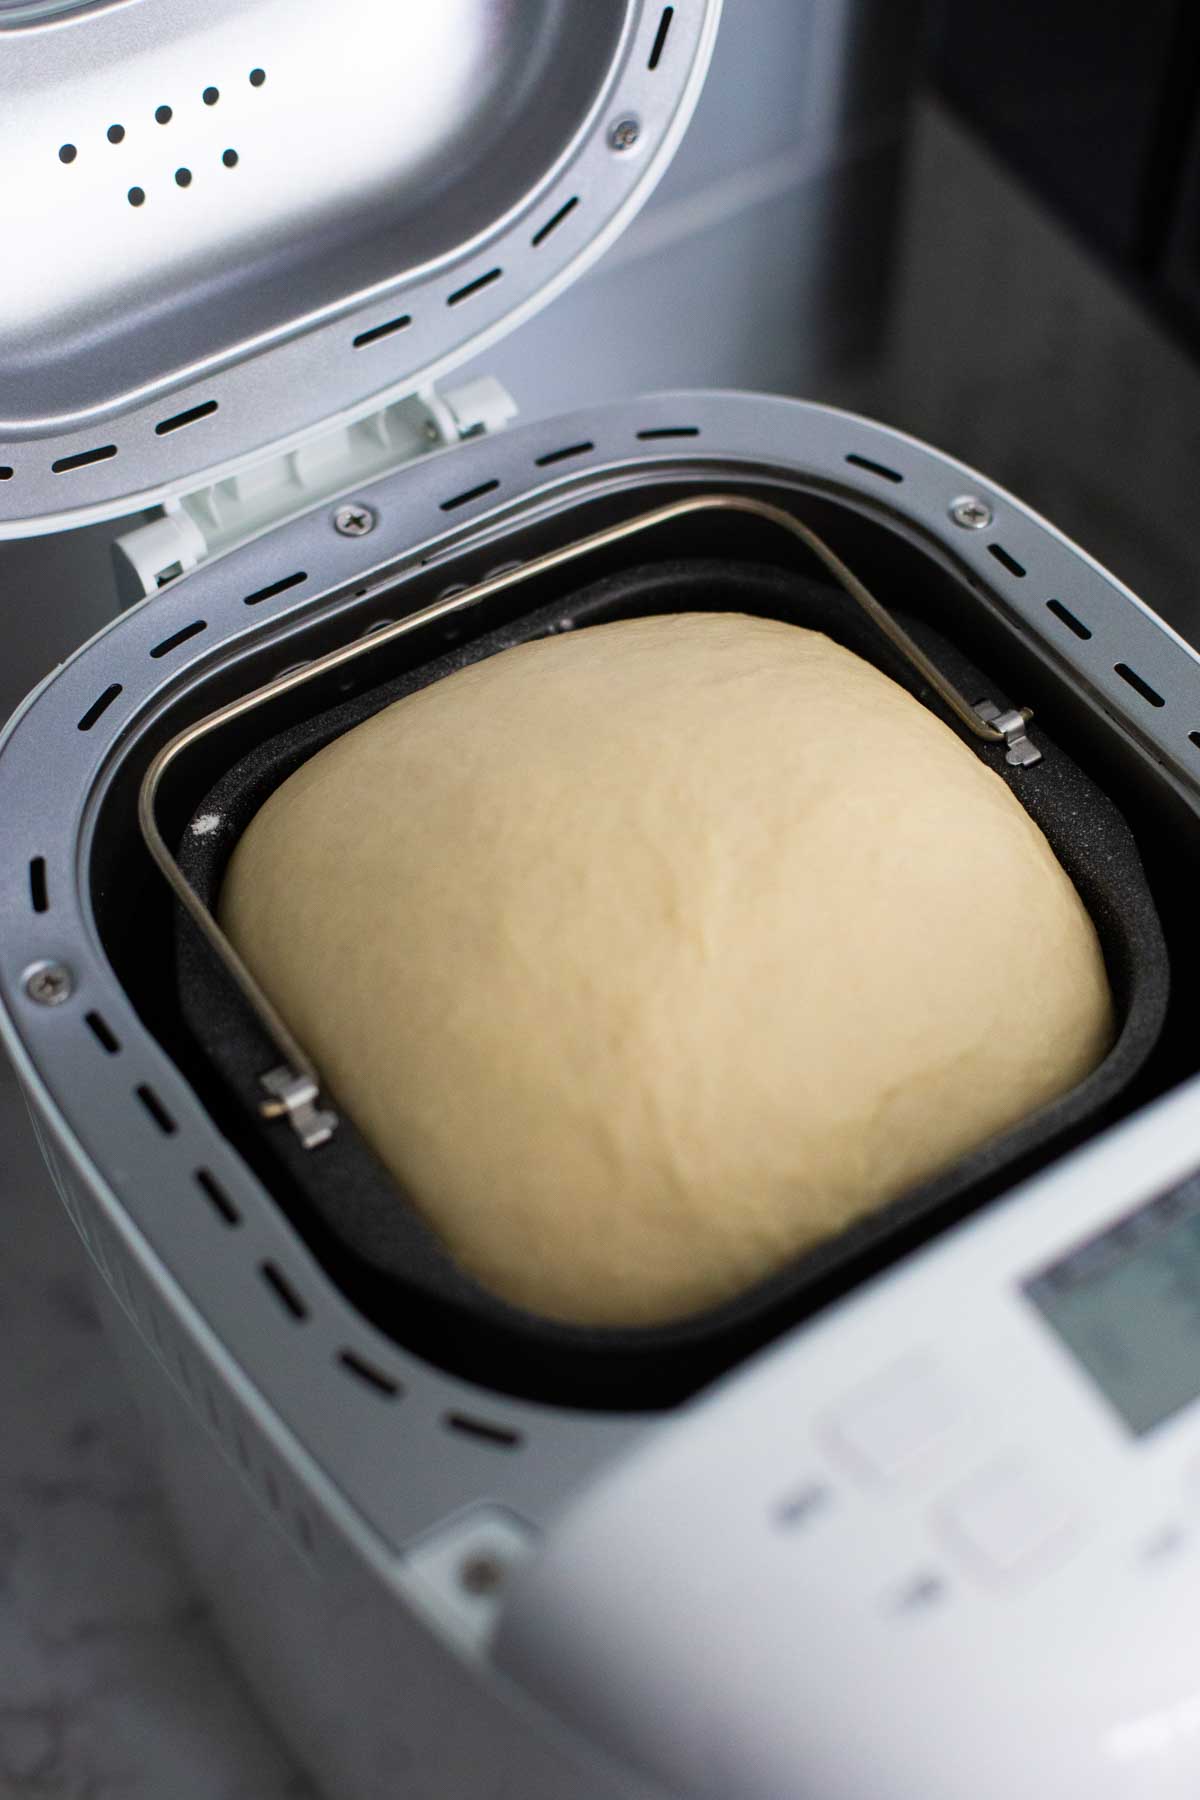 The dinner roll dough has risen in the bread machine.